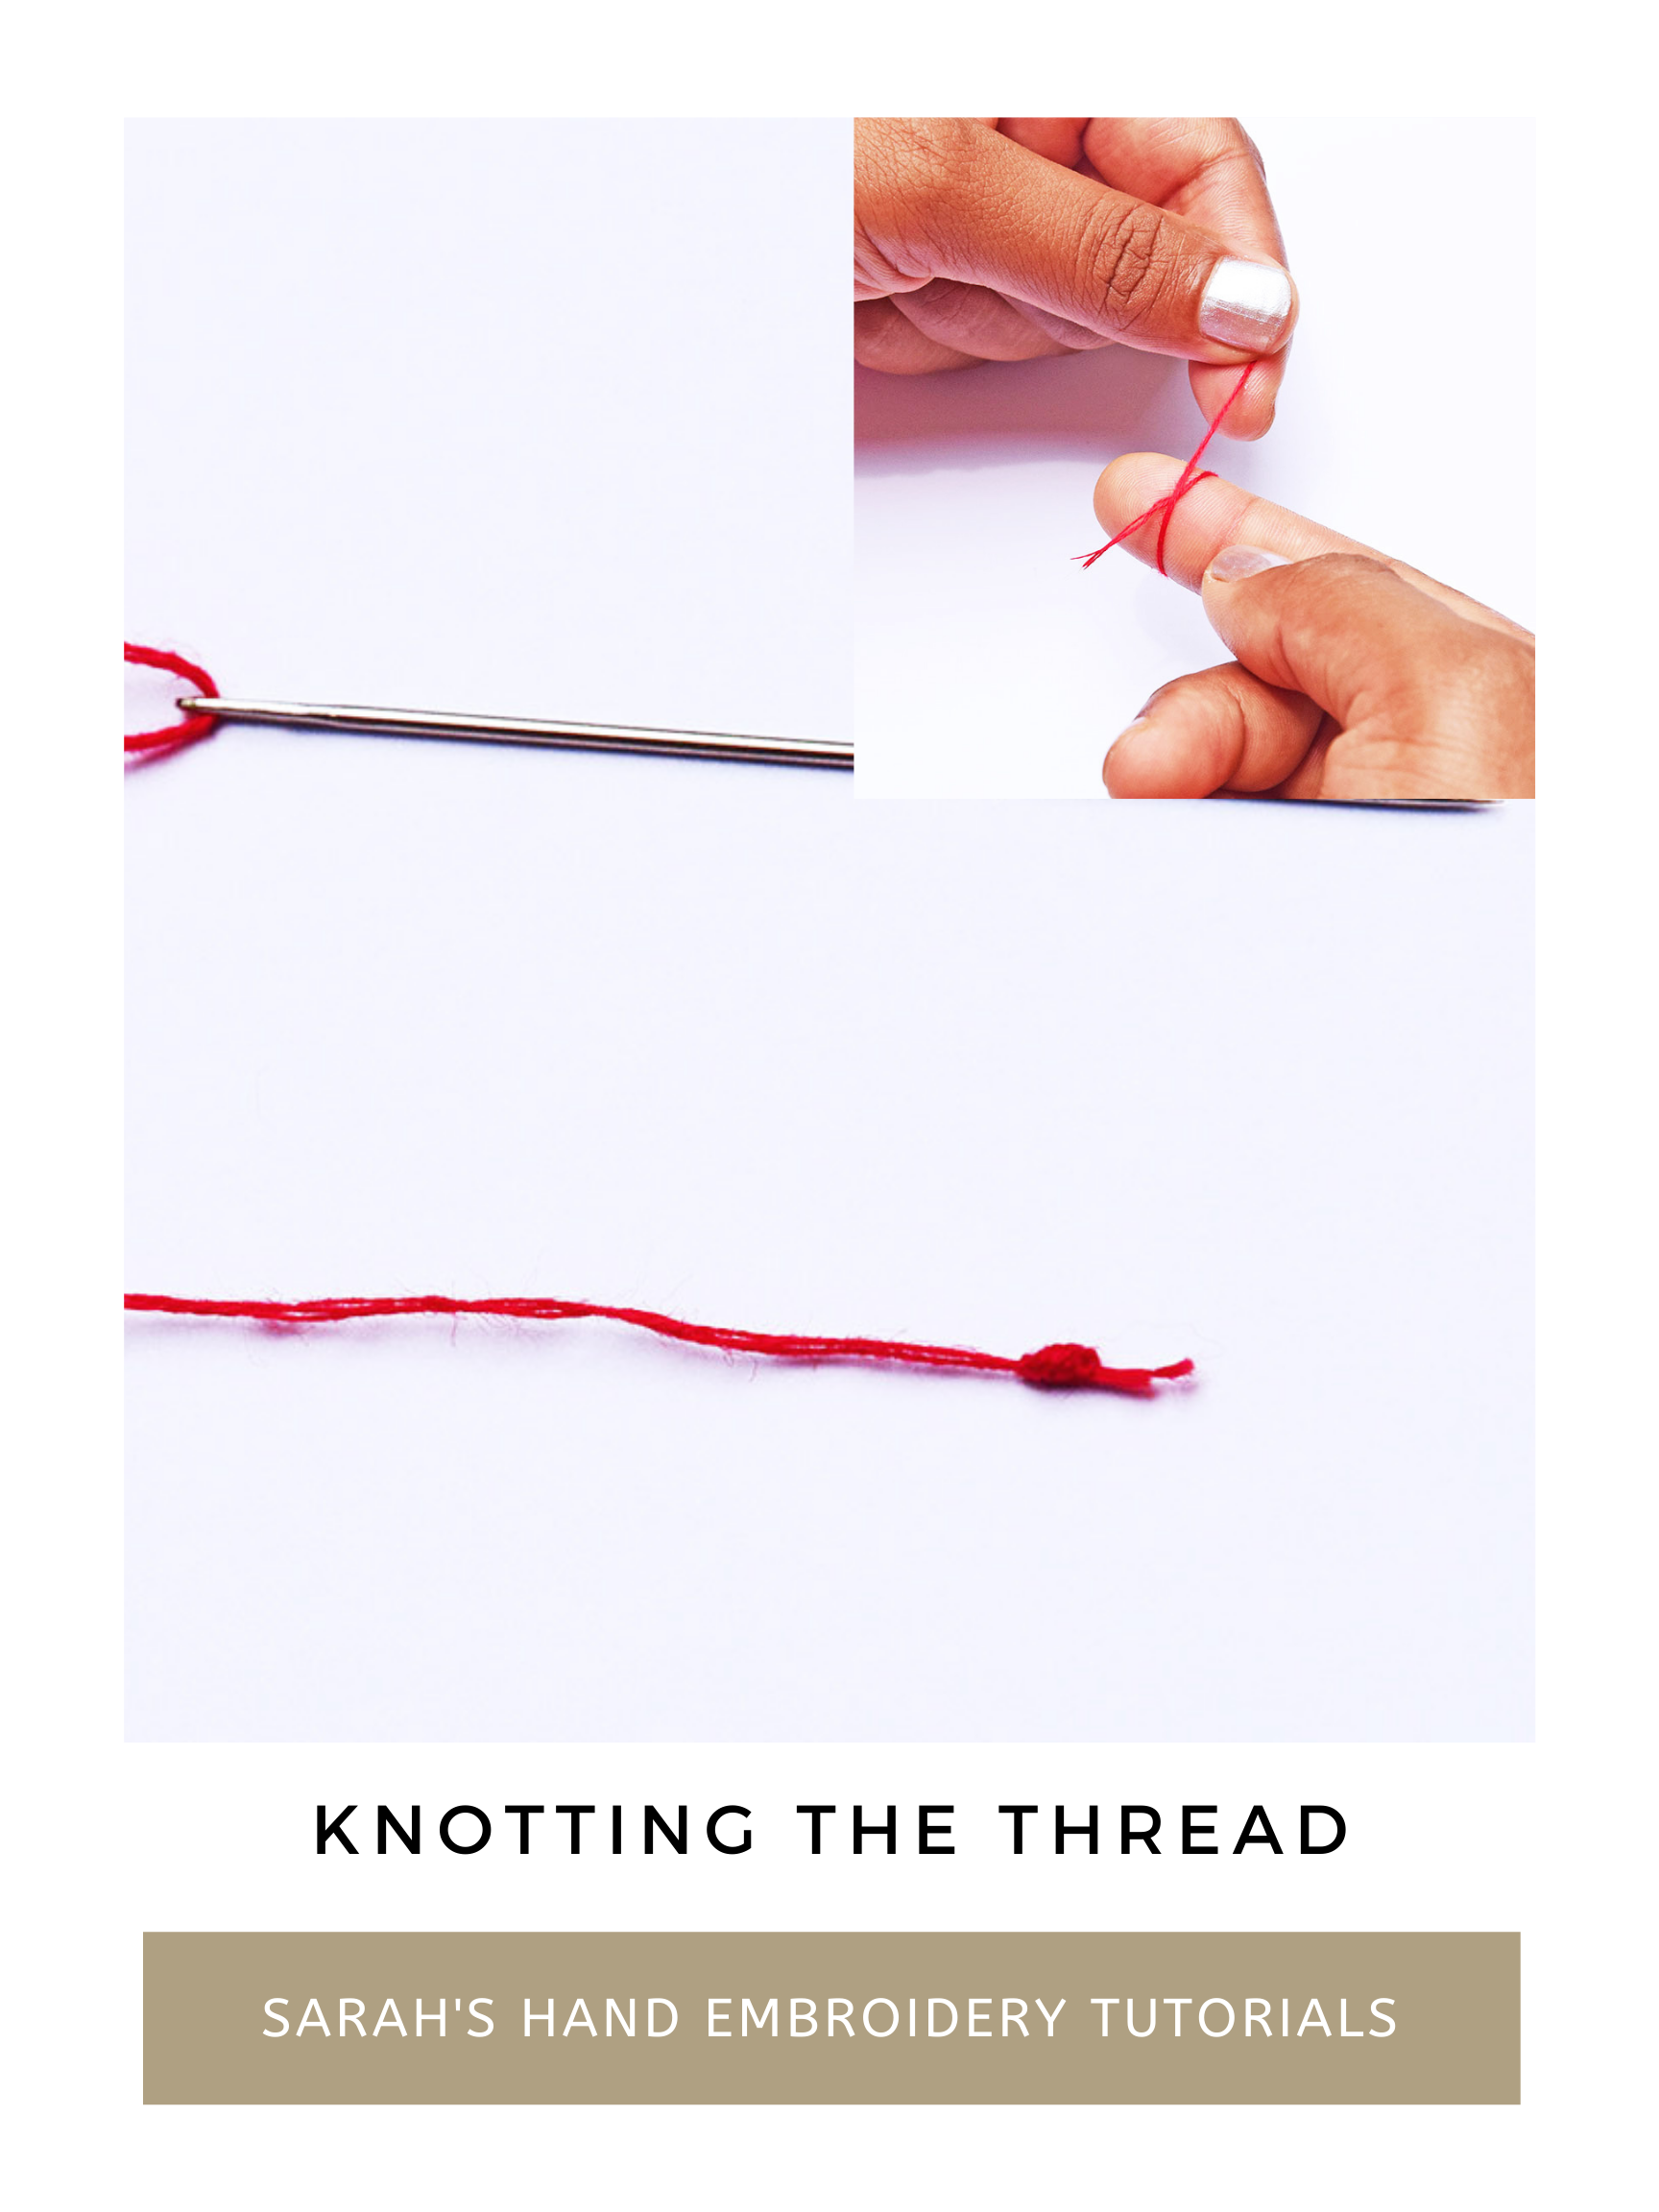 Knotting the Thread - Sarah's Hand Embroidery Tutorials